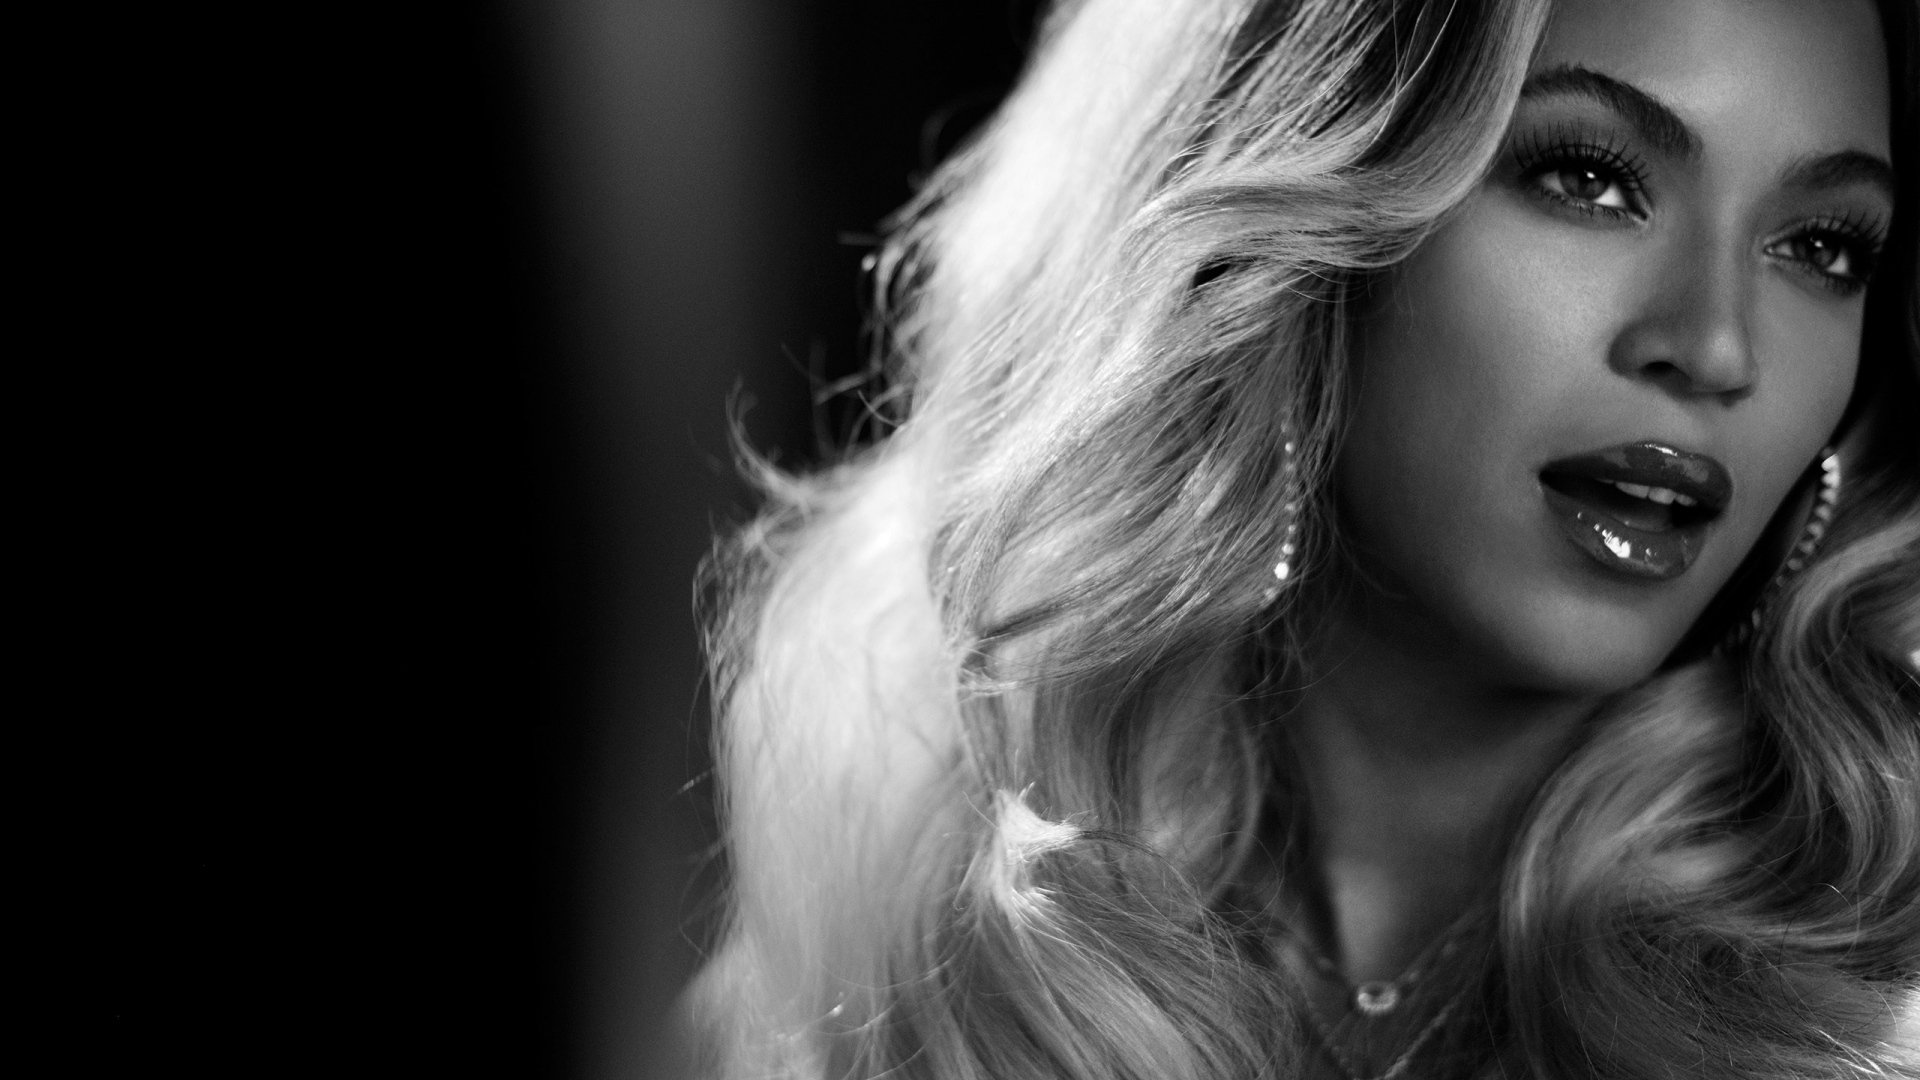 HD wallpaper featuring a monochrome portrait of a woman with wavy hair and glamorous makeup, providing an elegant desktop background.